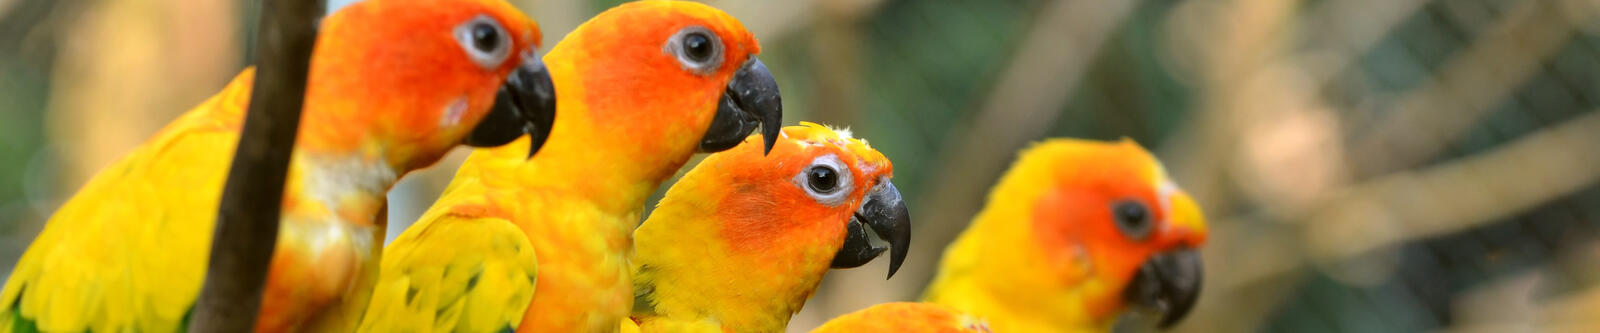 Wallpapers parrots yellow color on the desktop